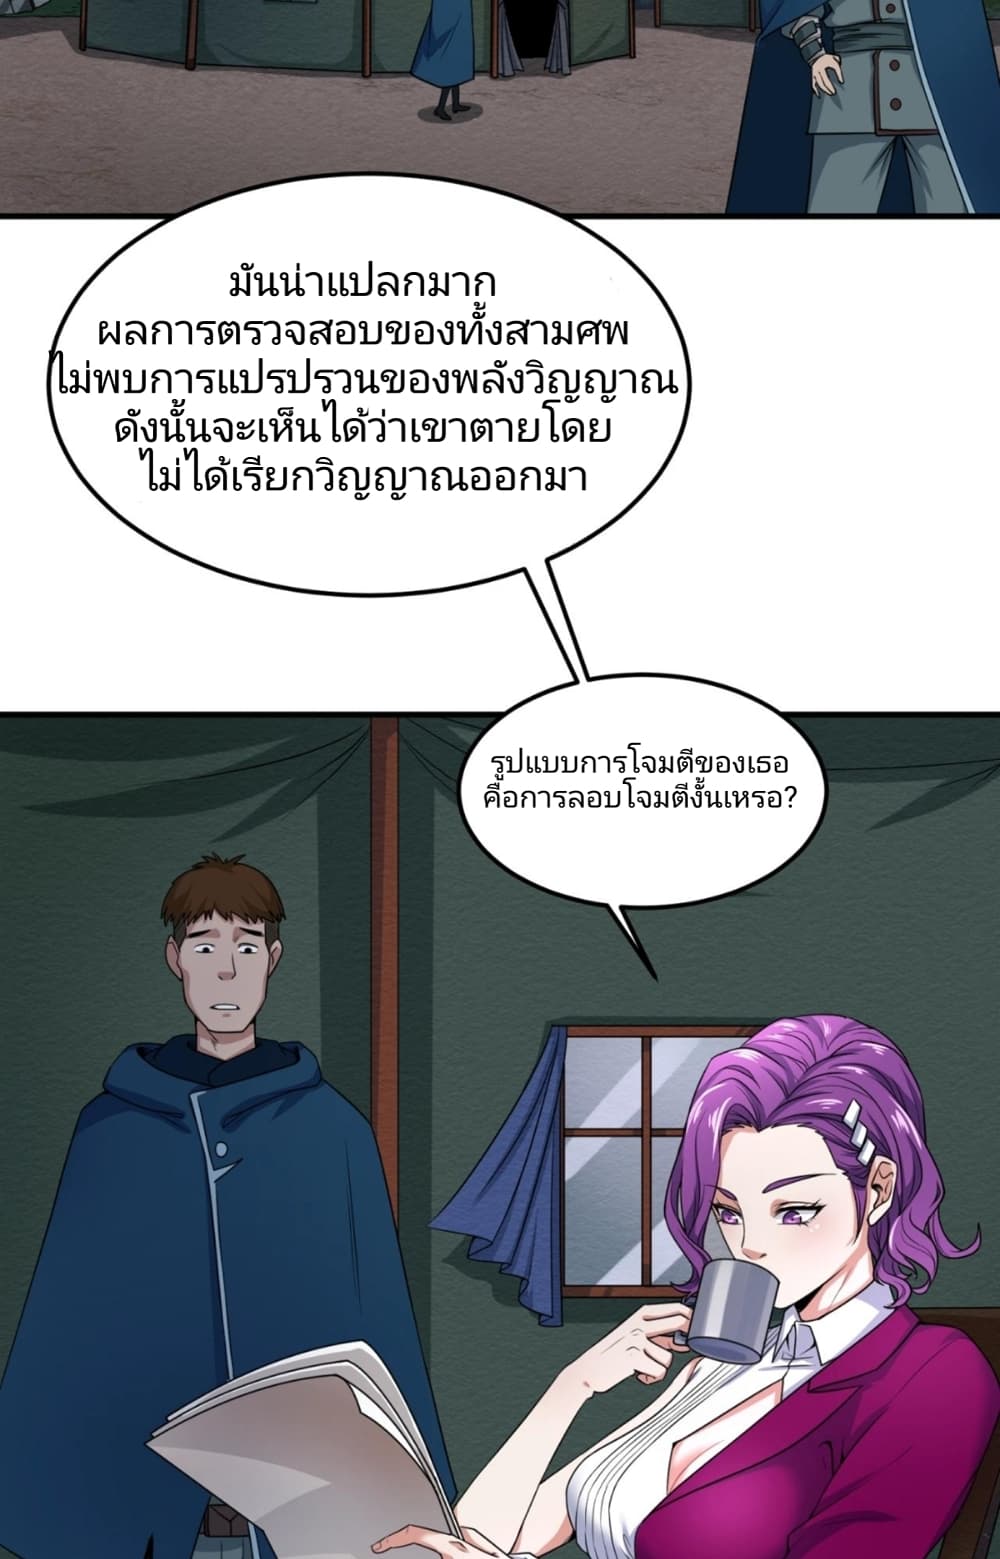 The Age of Ghost Spirits à¸à¸­à¸à¸à¸µà¹ 10 (24)